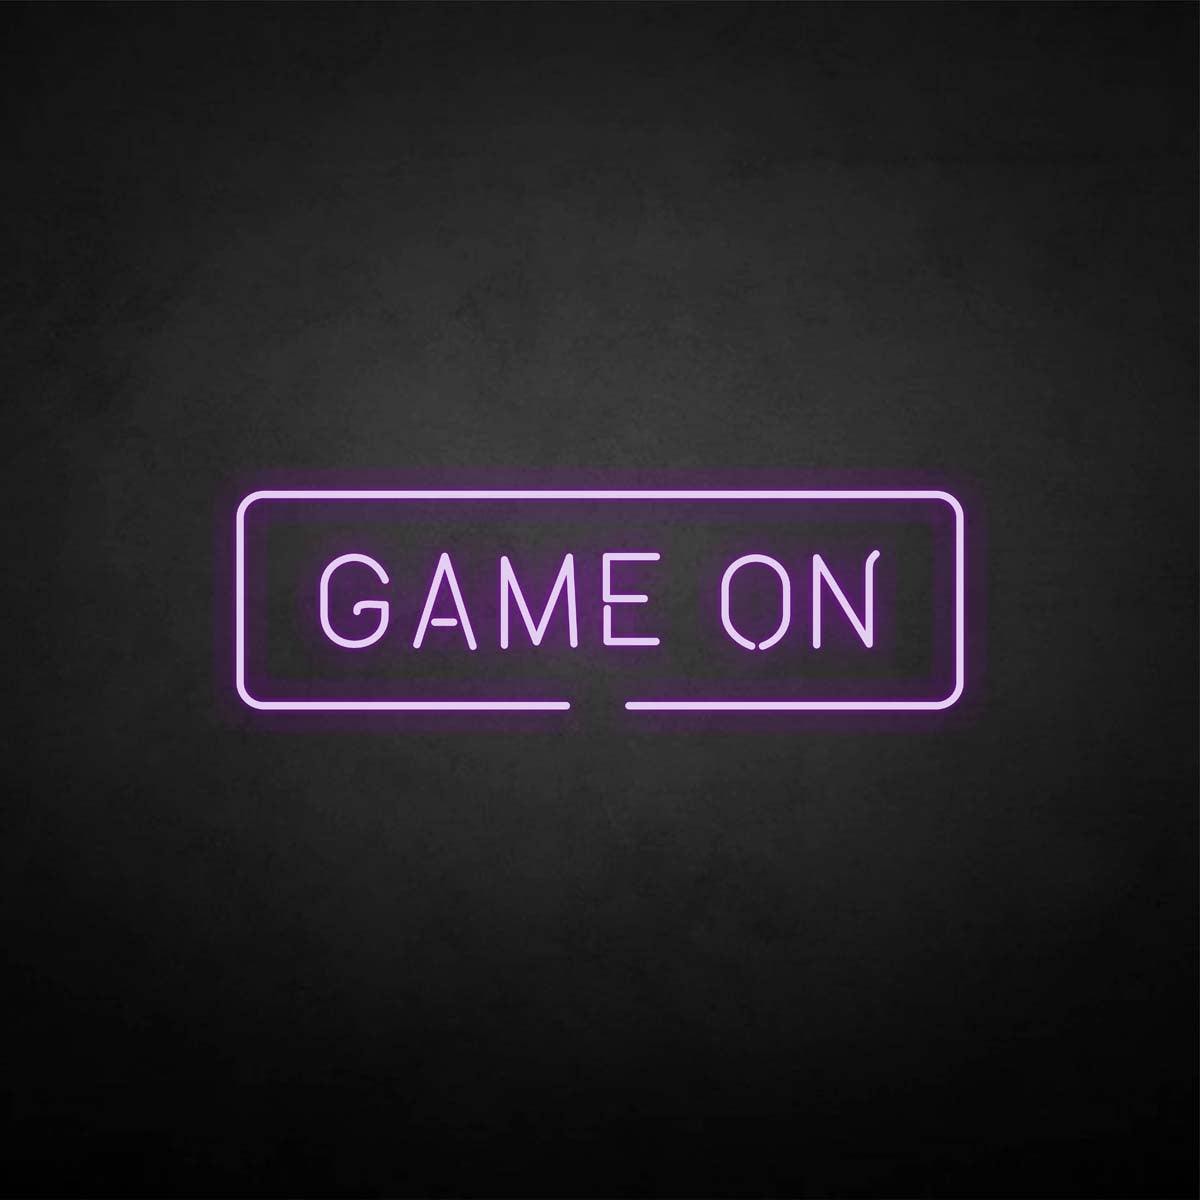 'Game on' neon sign